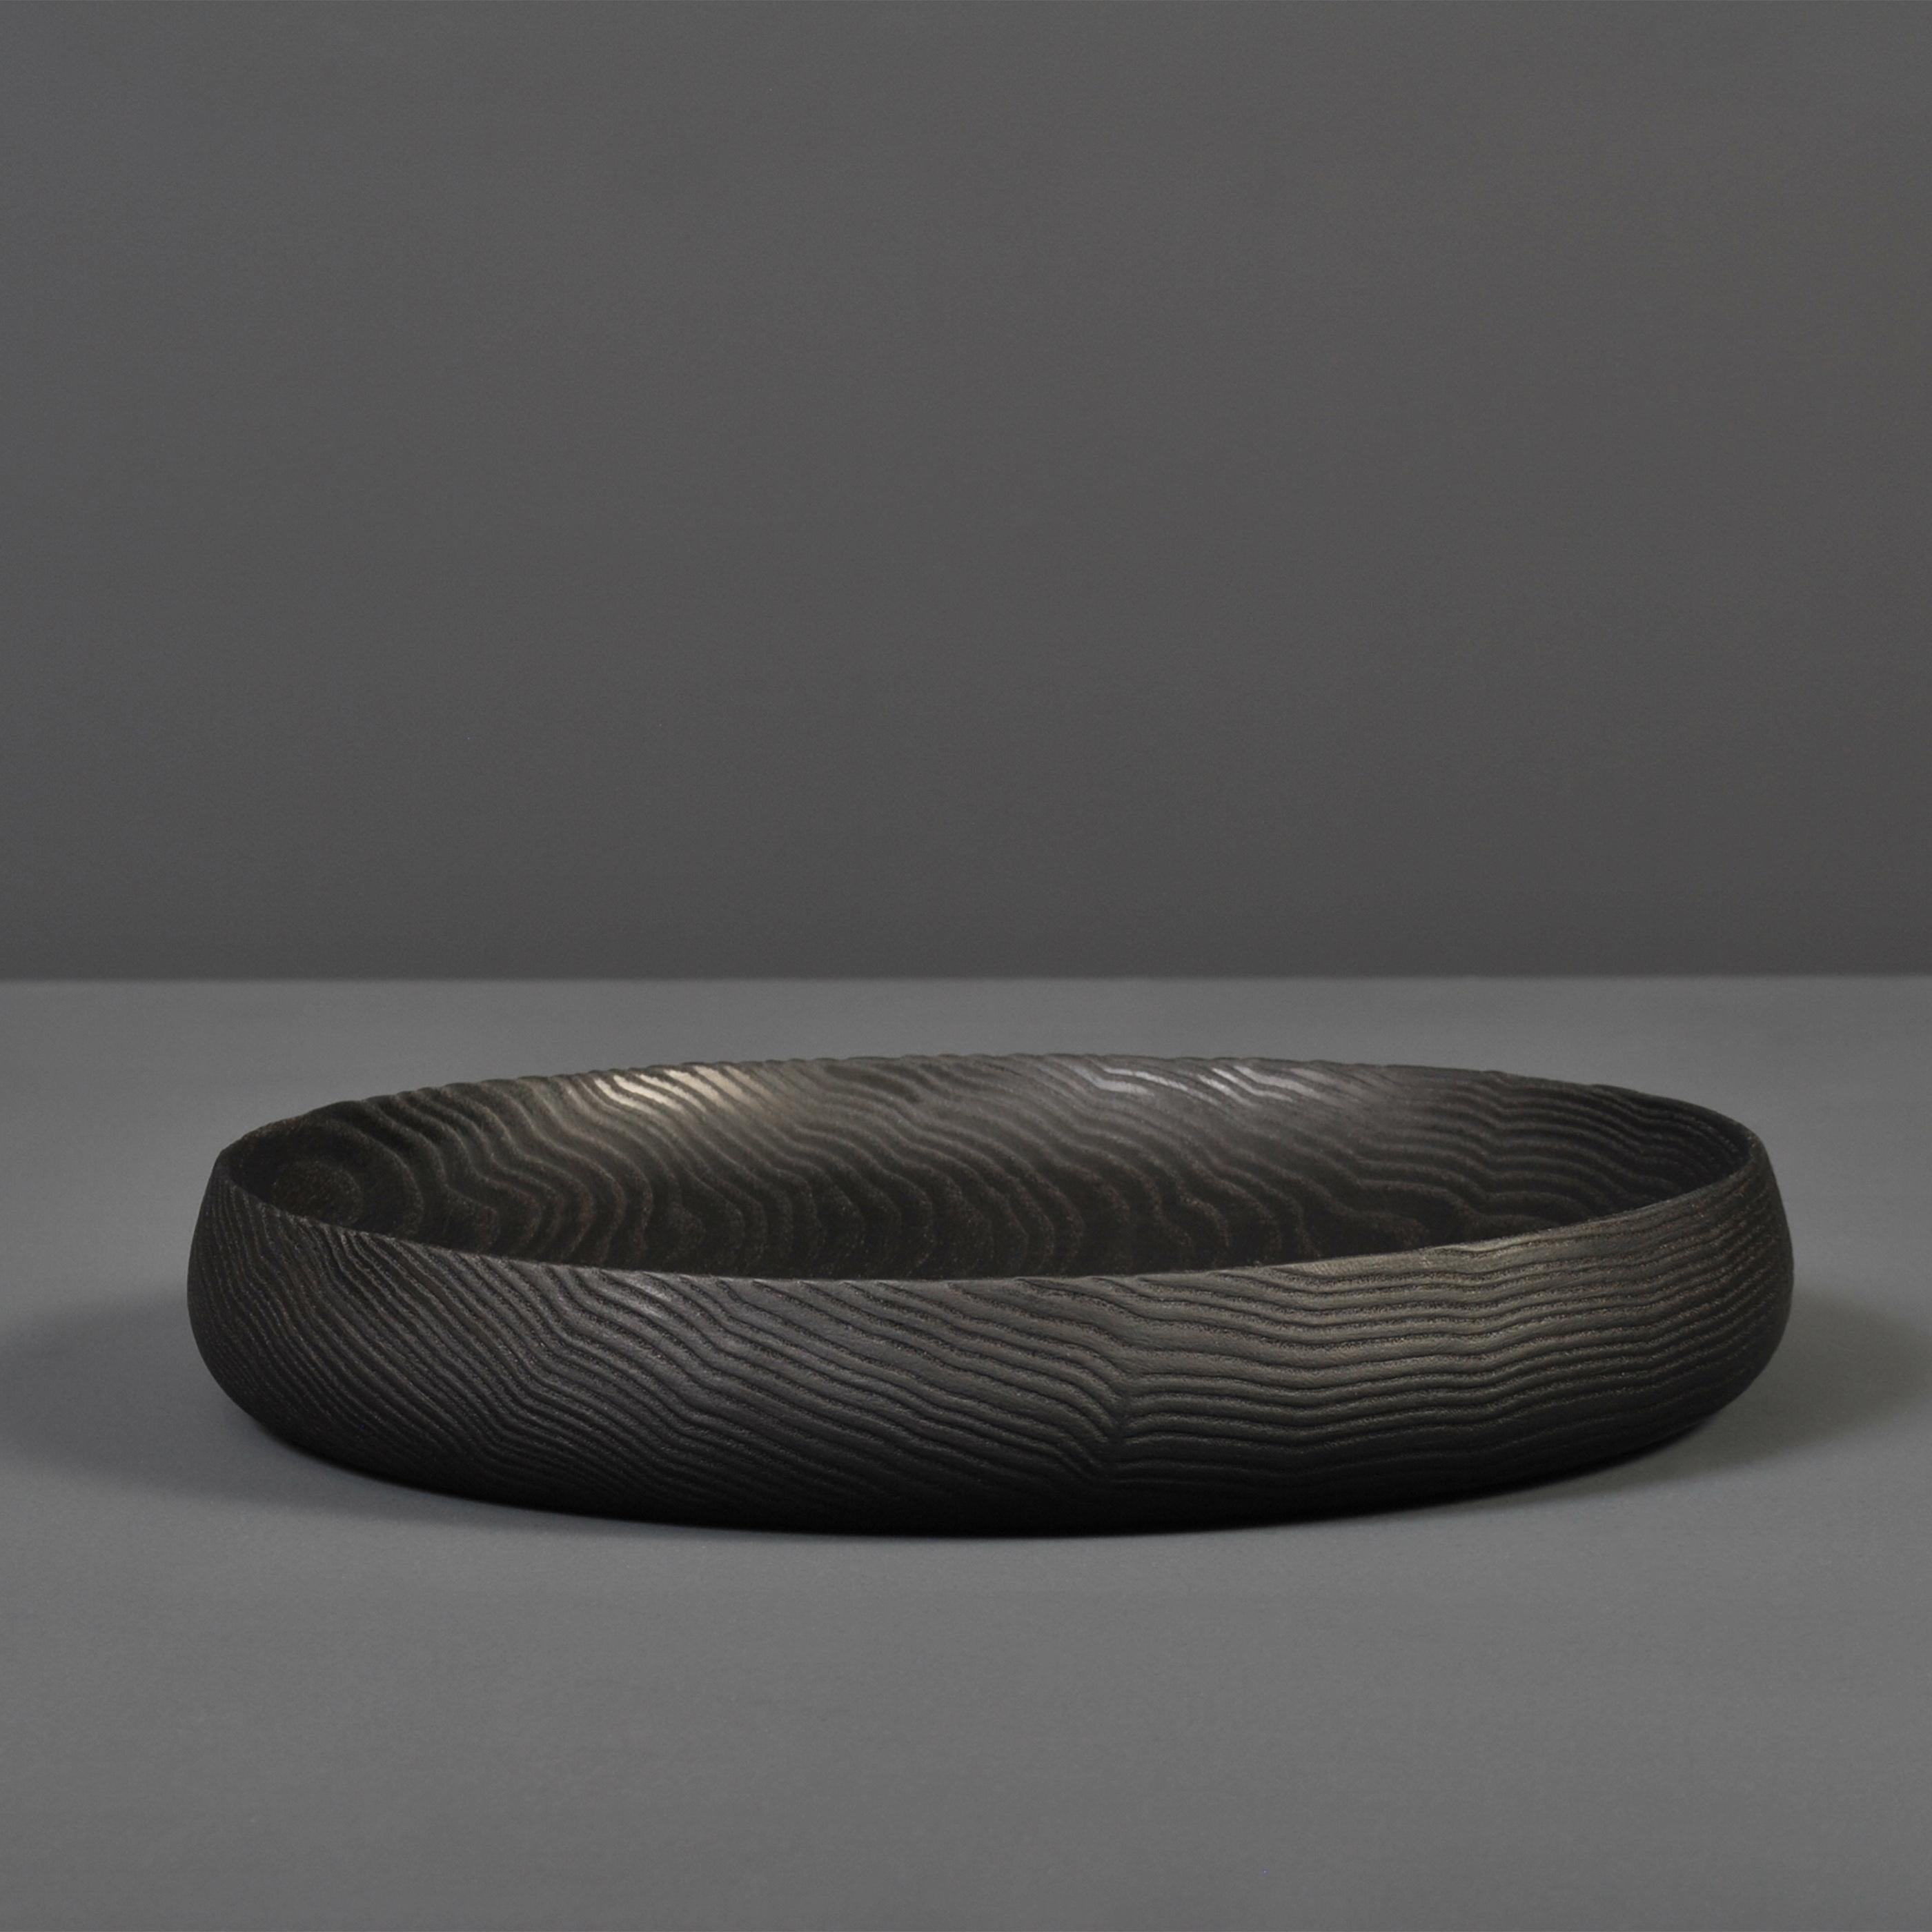 Hand-Crafted Handcrafted Ash Yakisugi Platter For Sale